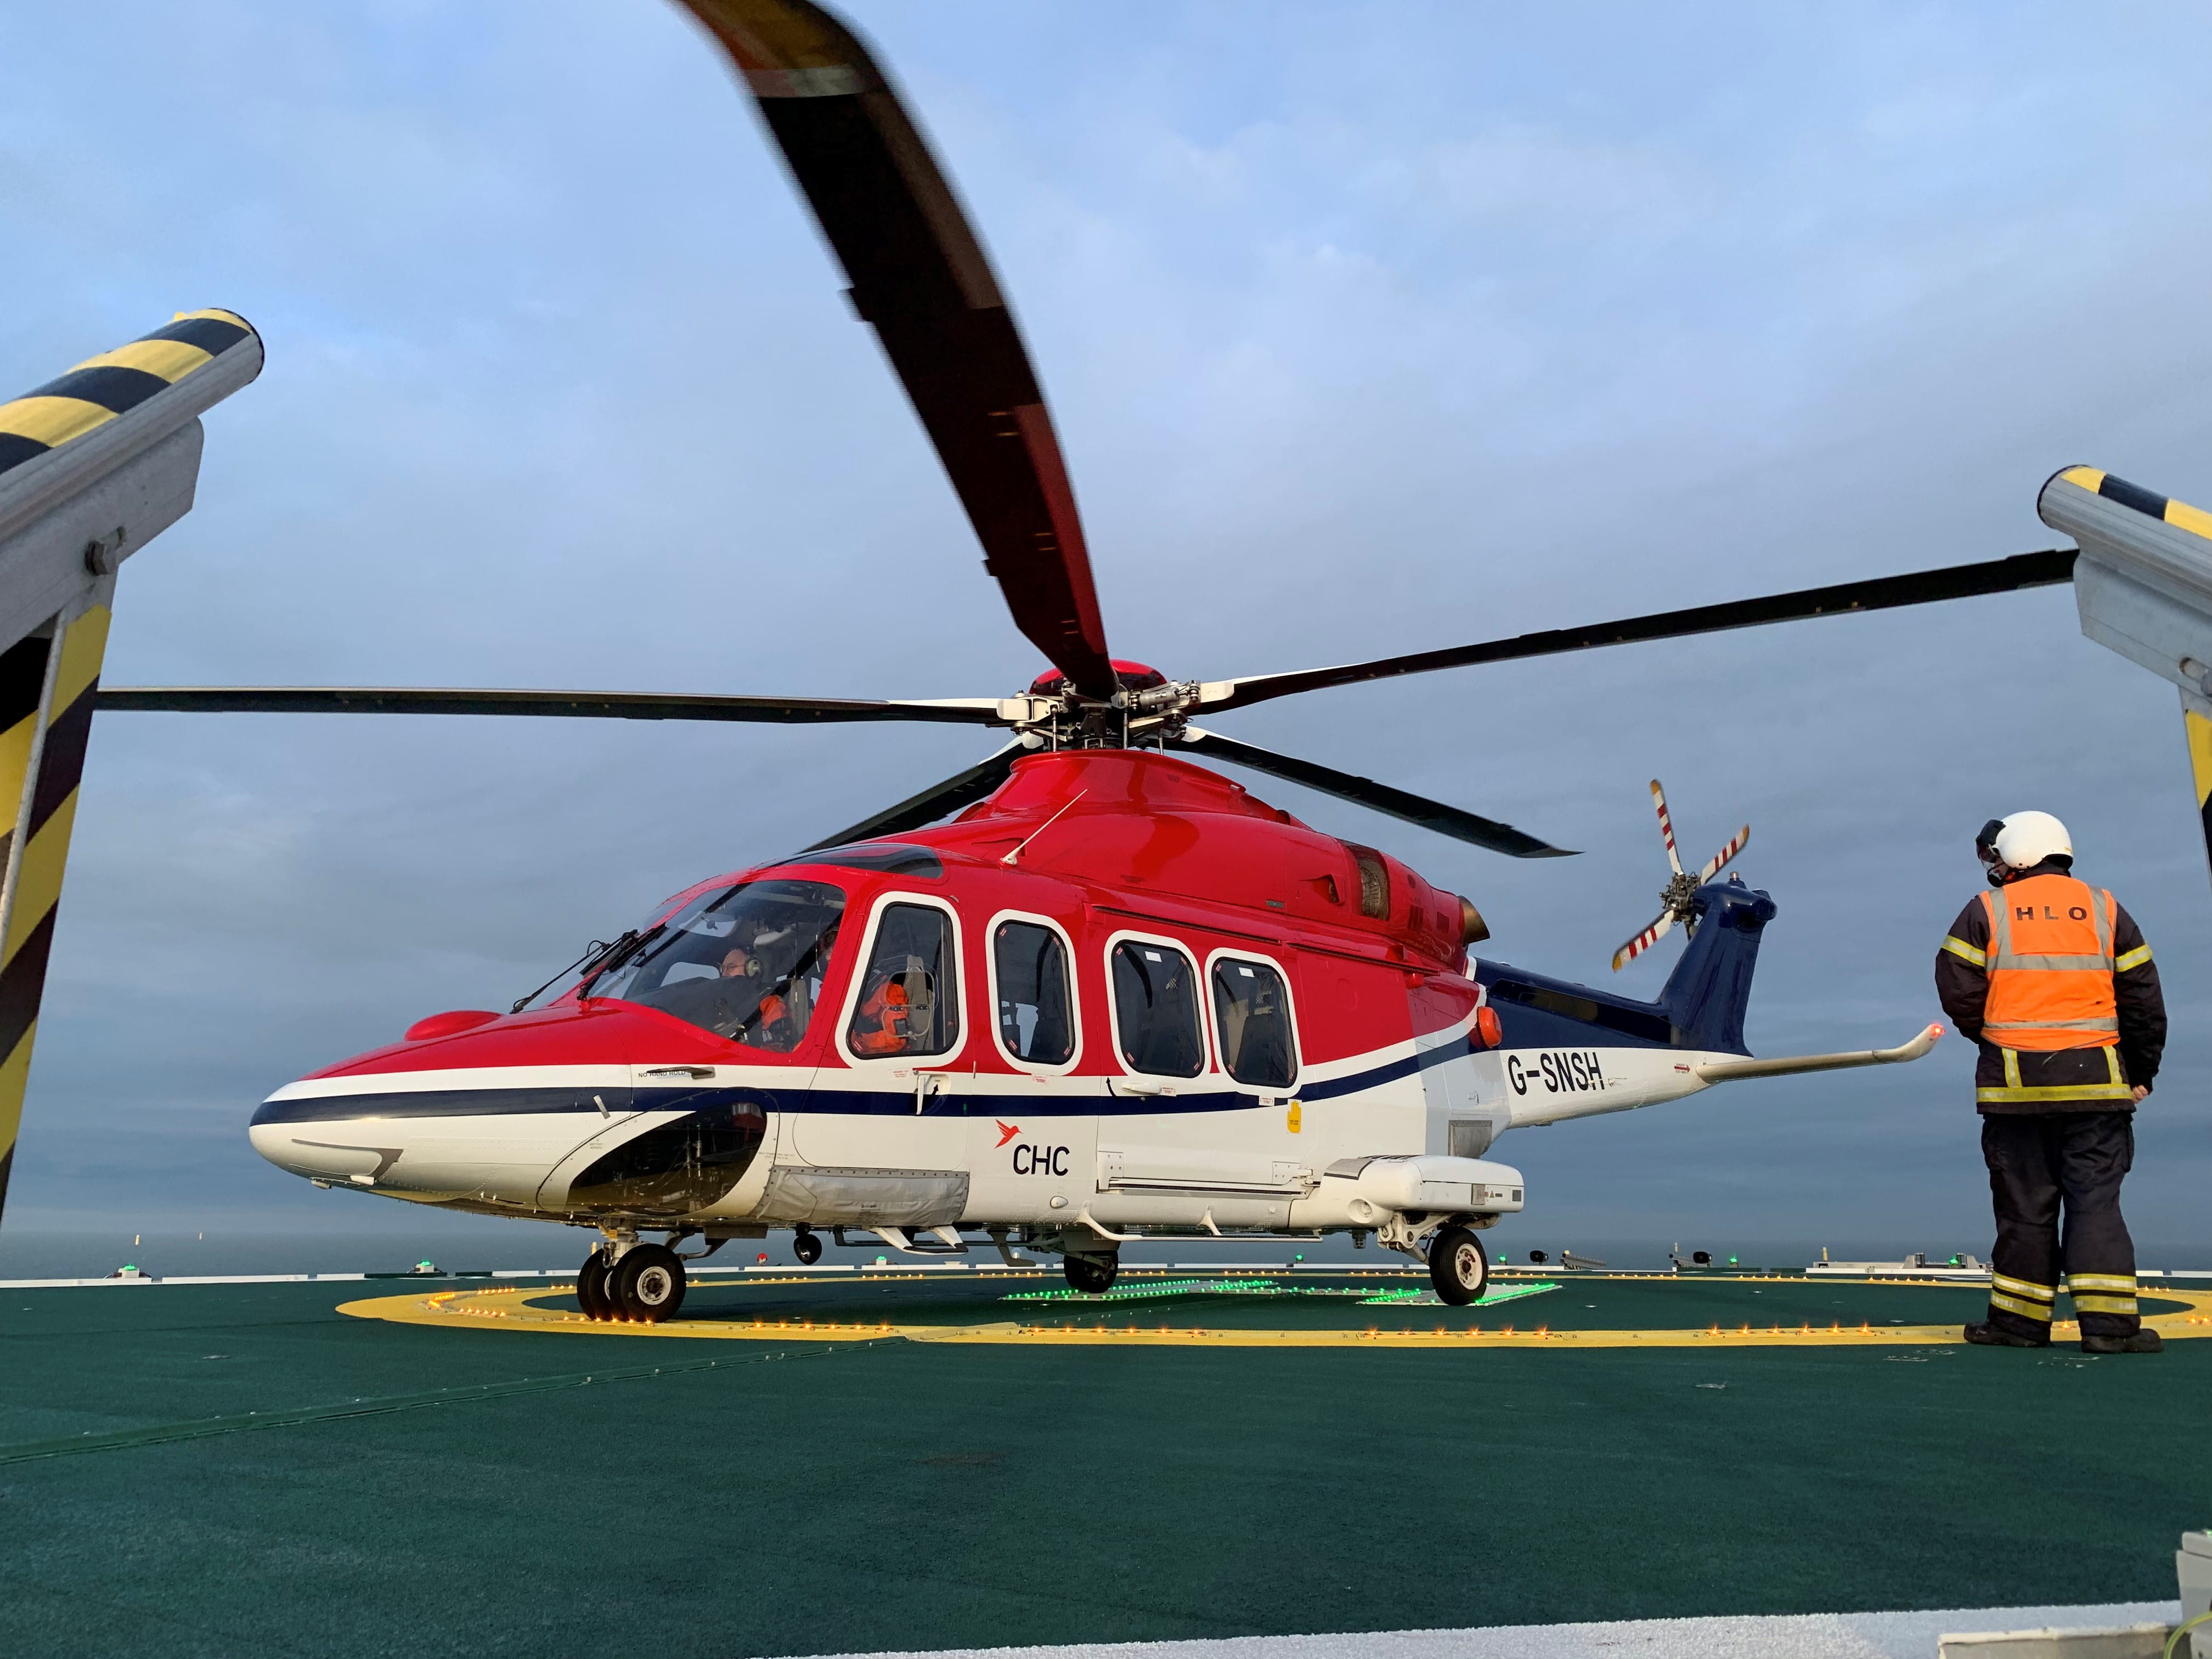 An AW139 CHC Helicopter on Offshore Heli-Deck - Credit: Adam White, Ørsted